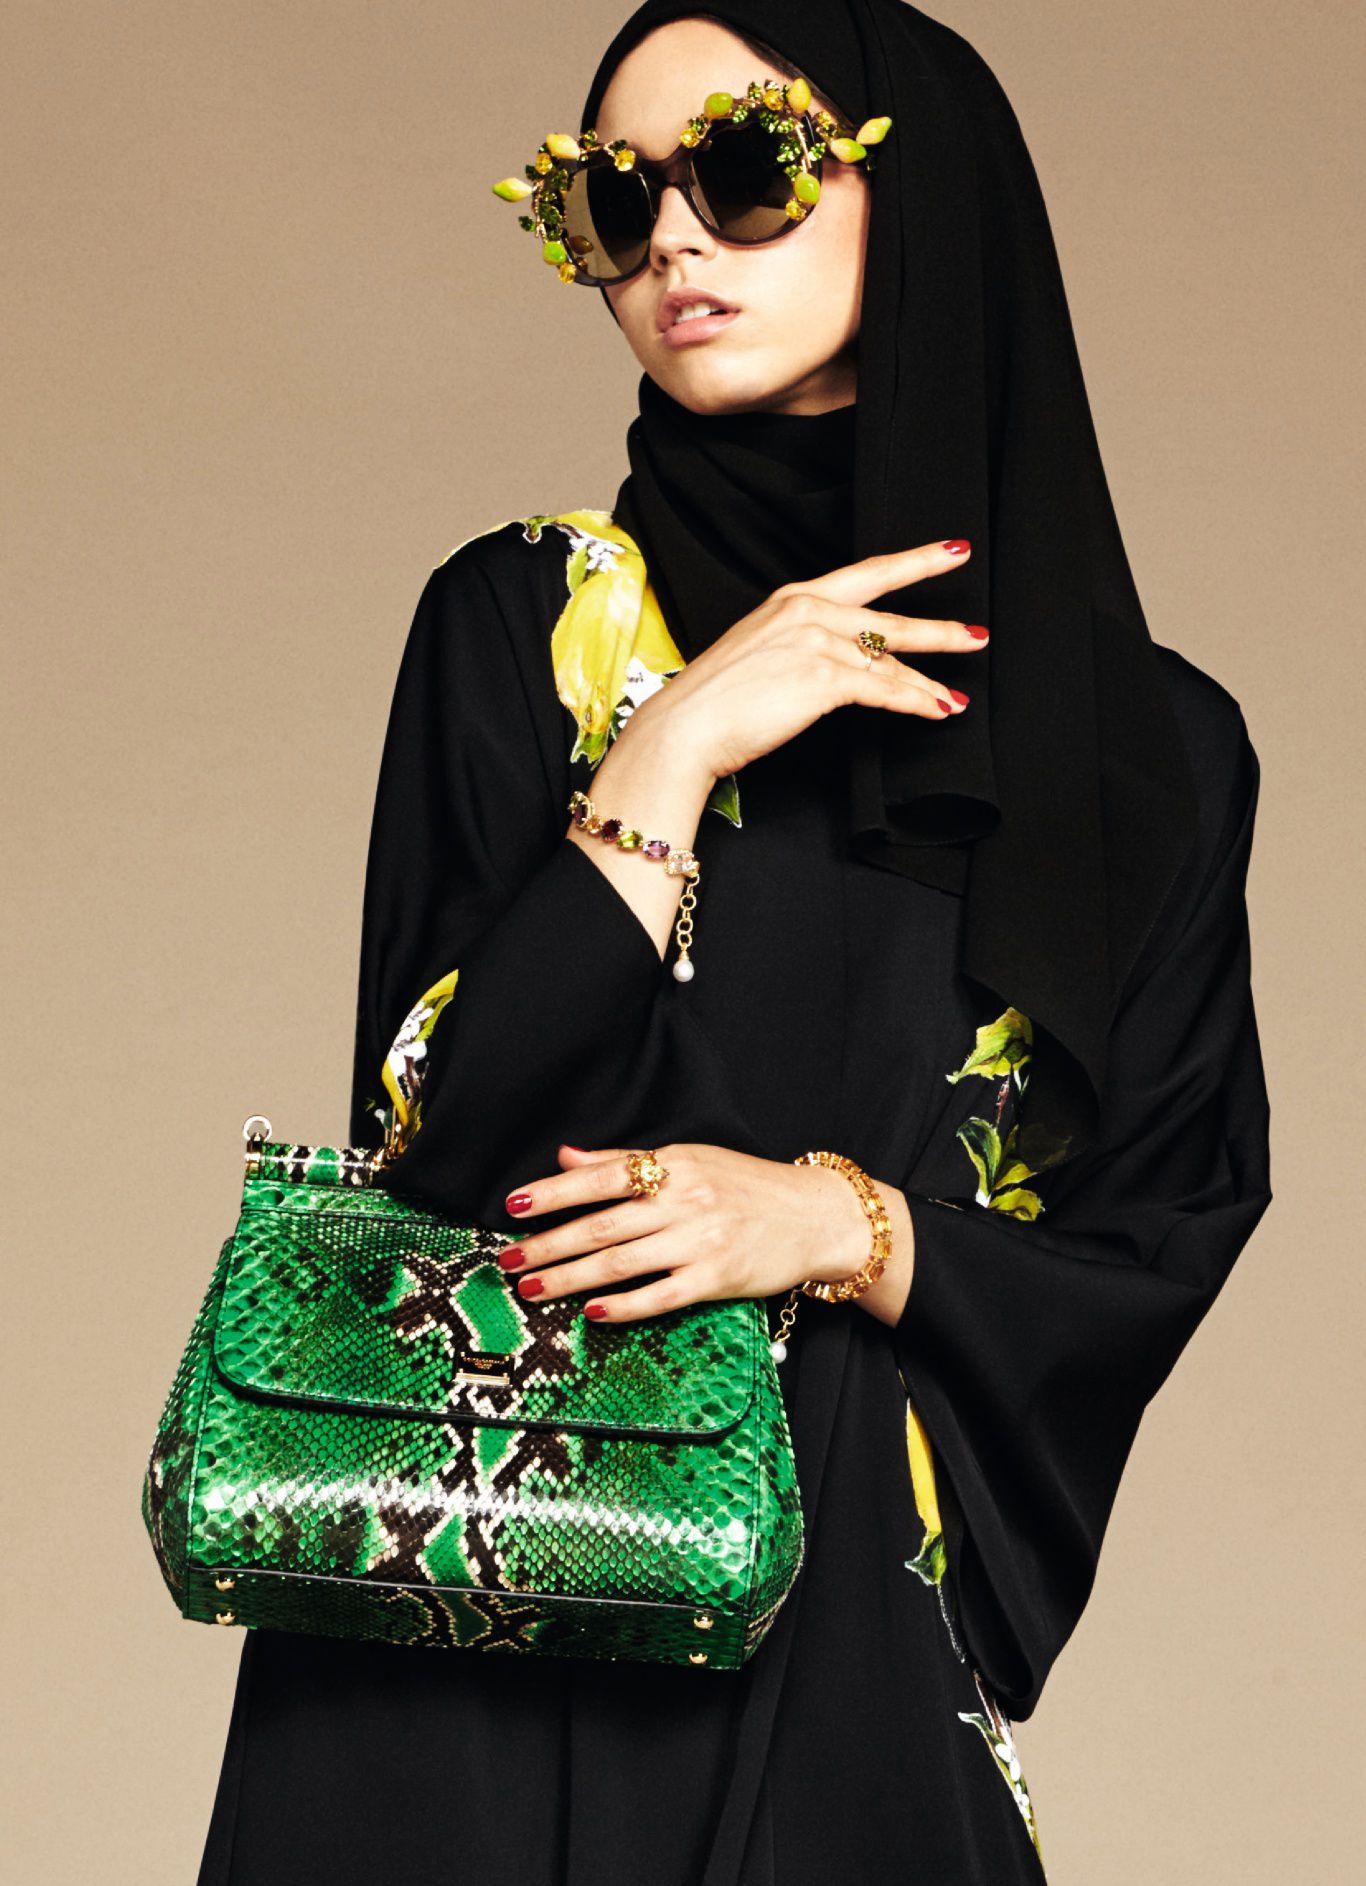 Dolce And Gabbana Debuts Their First Abaya And Hijab Collection For Fashionable Muslim Women